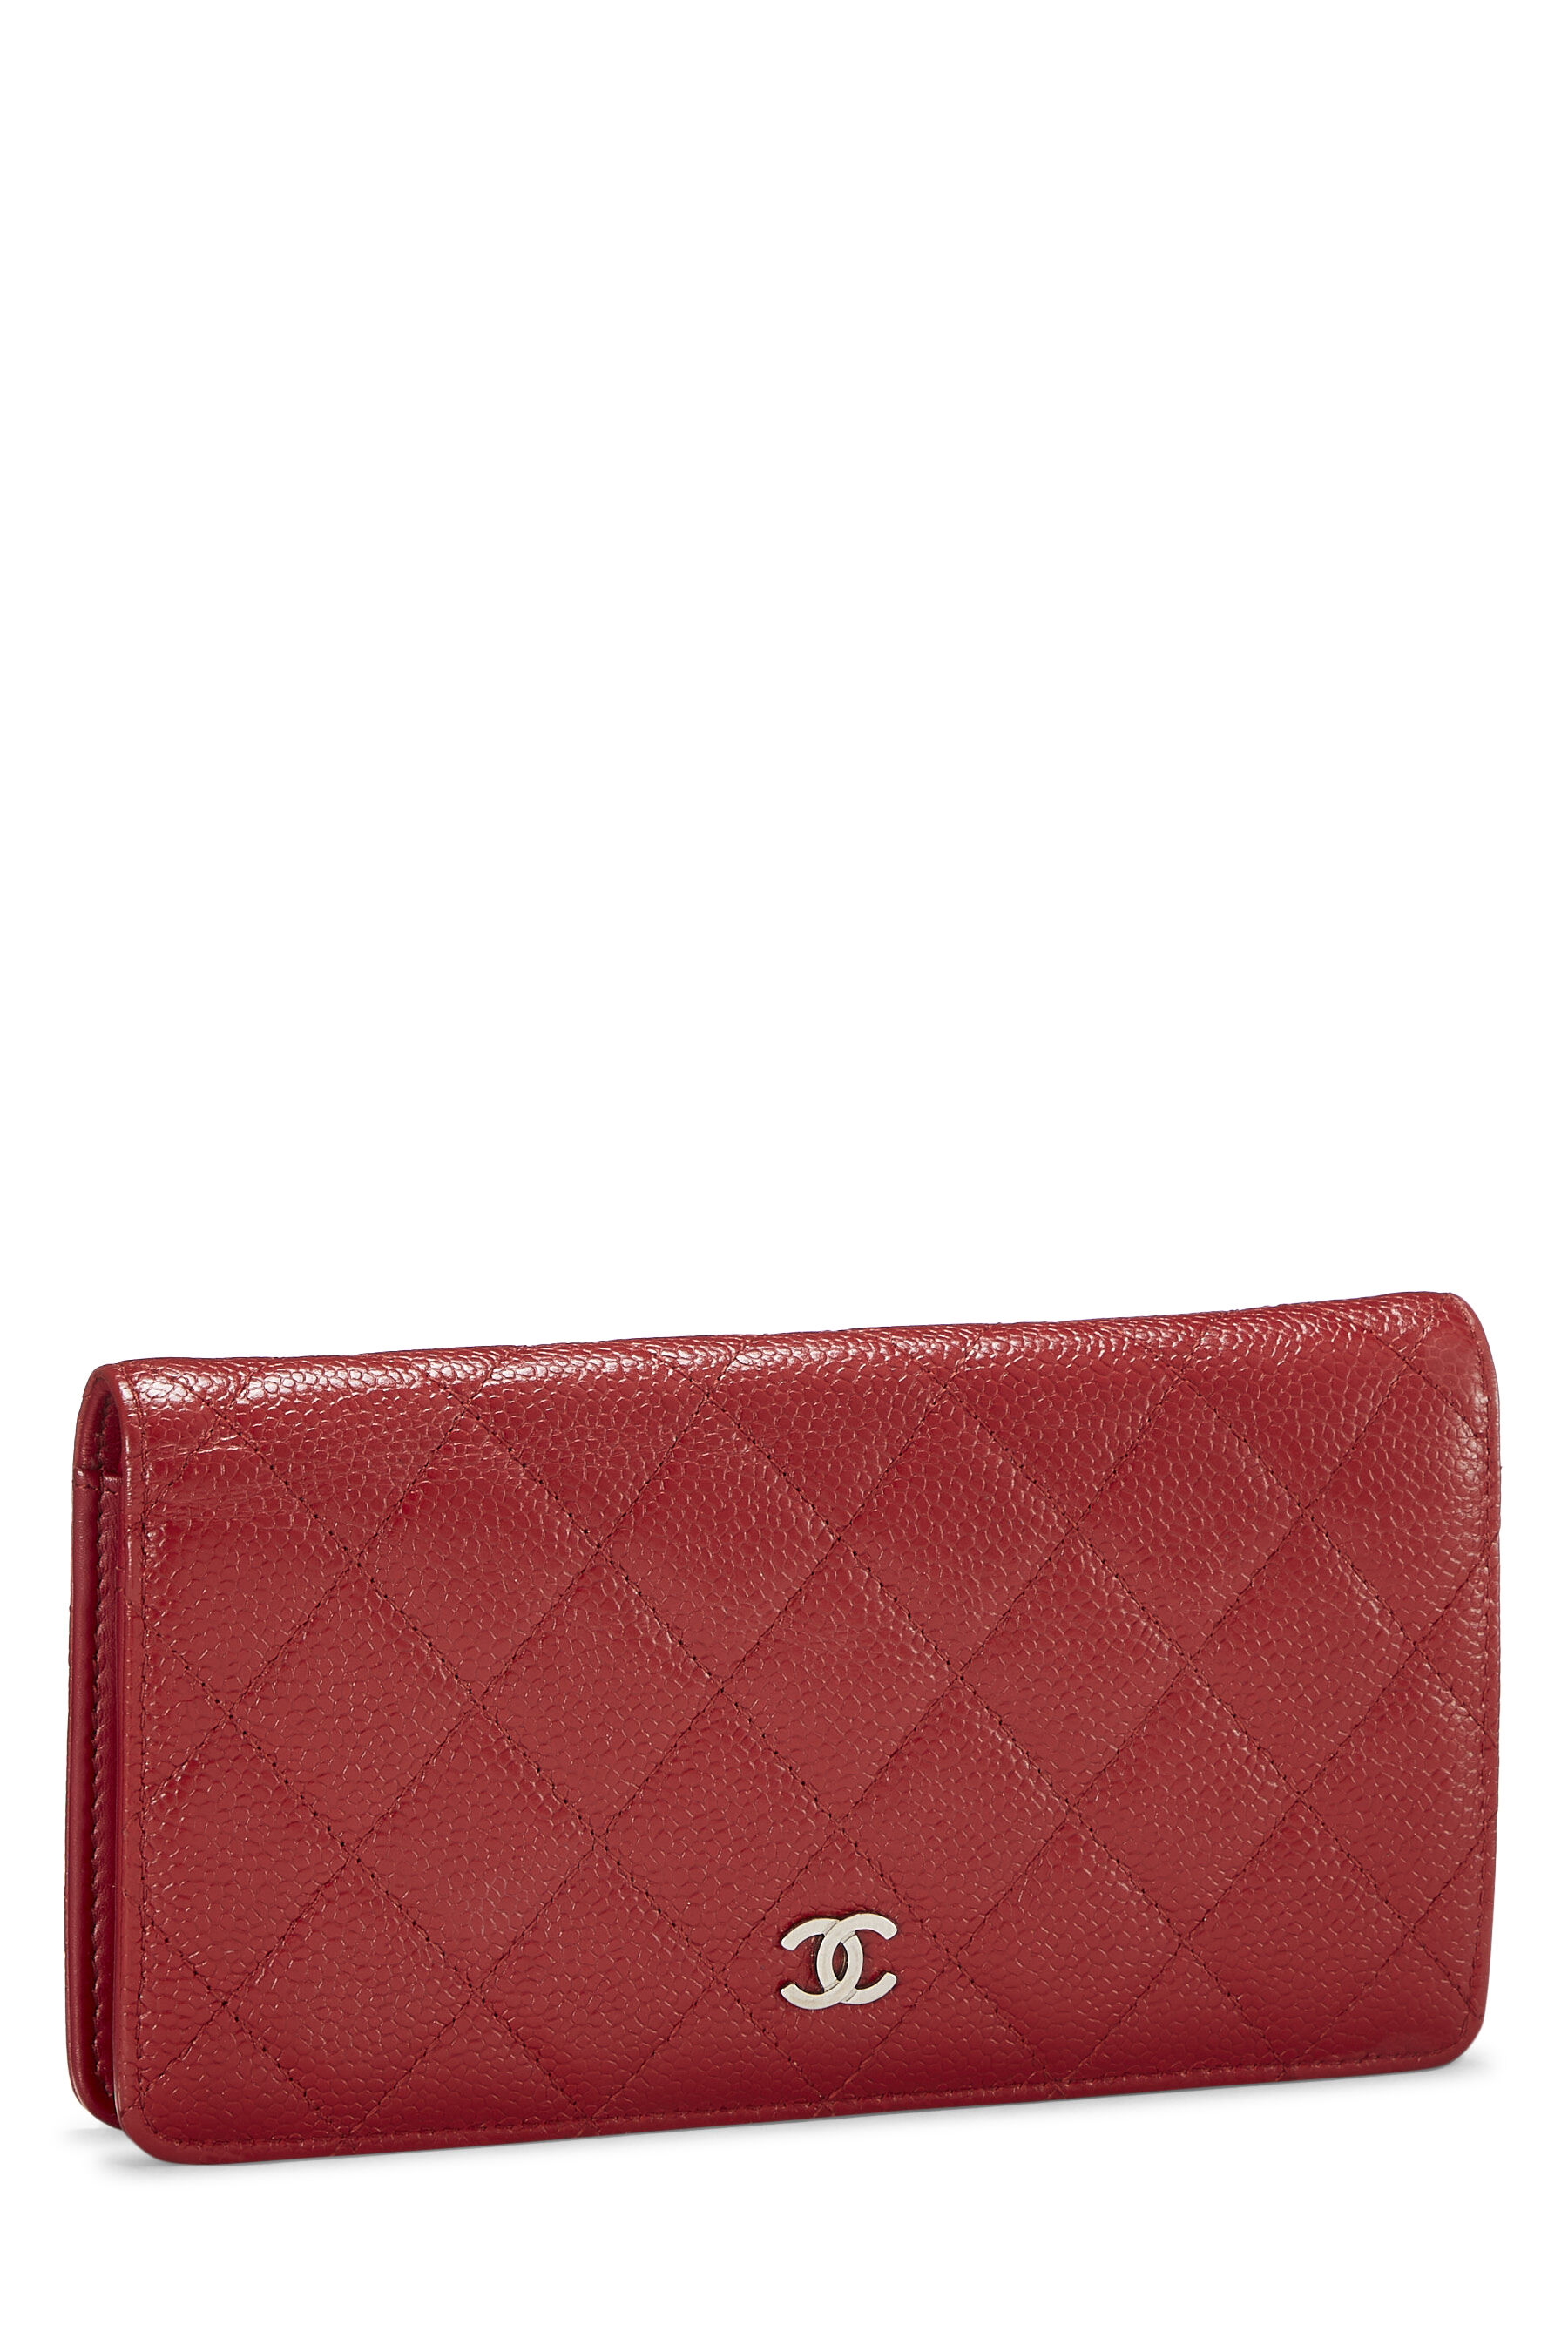 Chanel - Red Quilted Caviar Long Flap Wallet